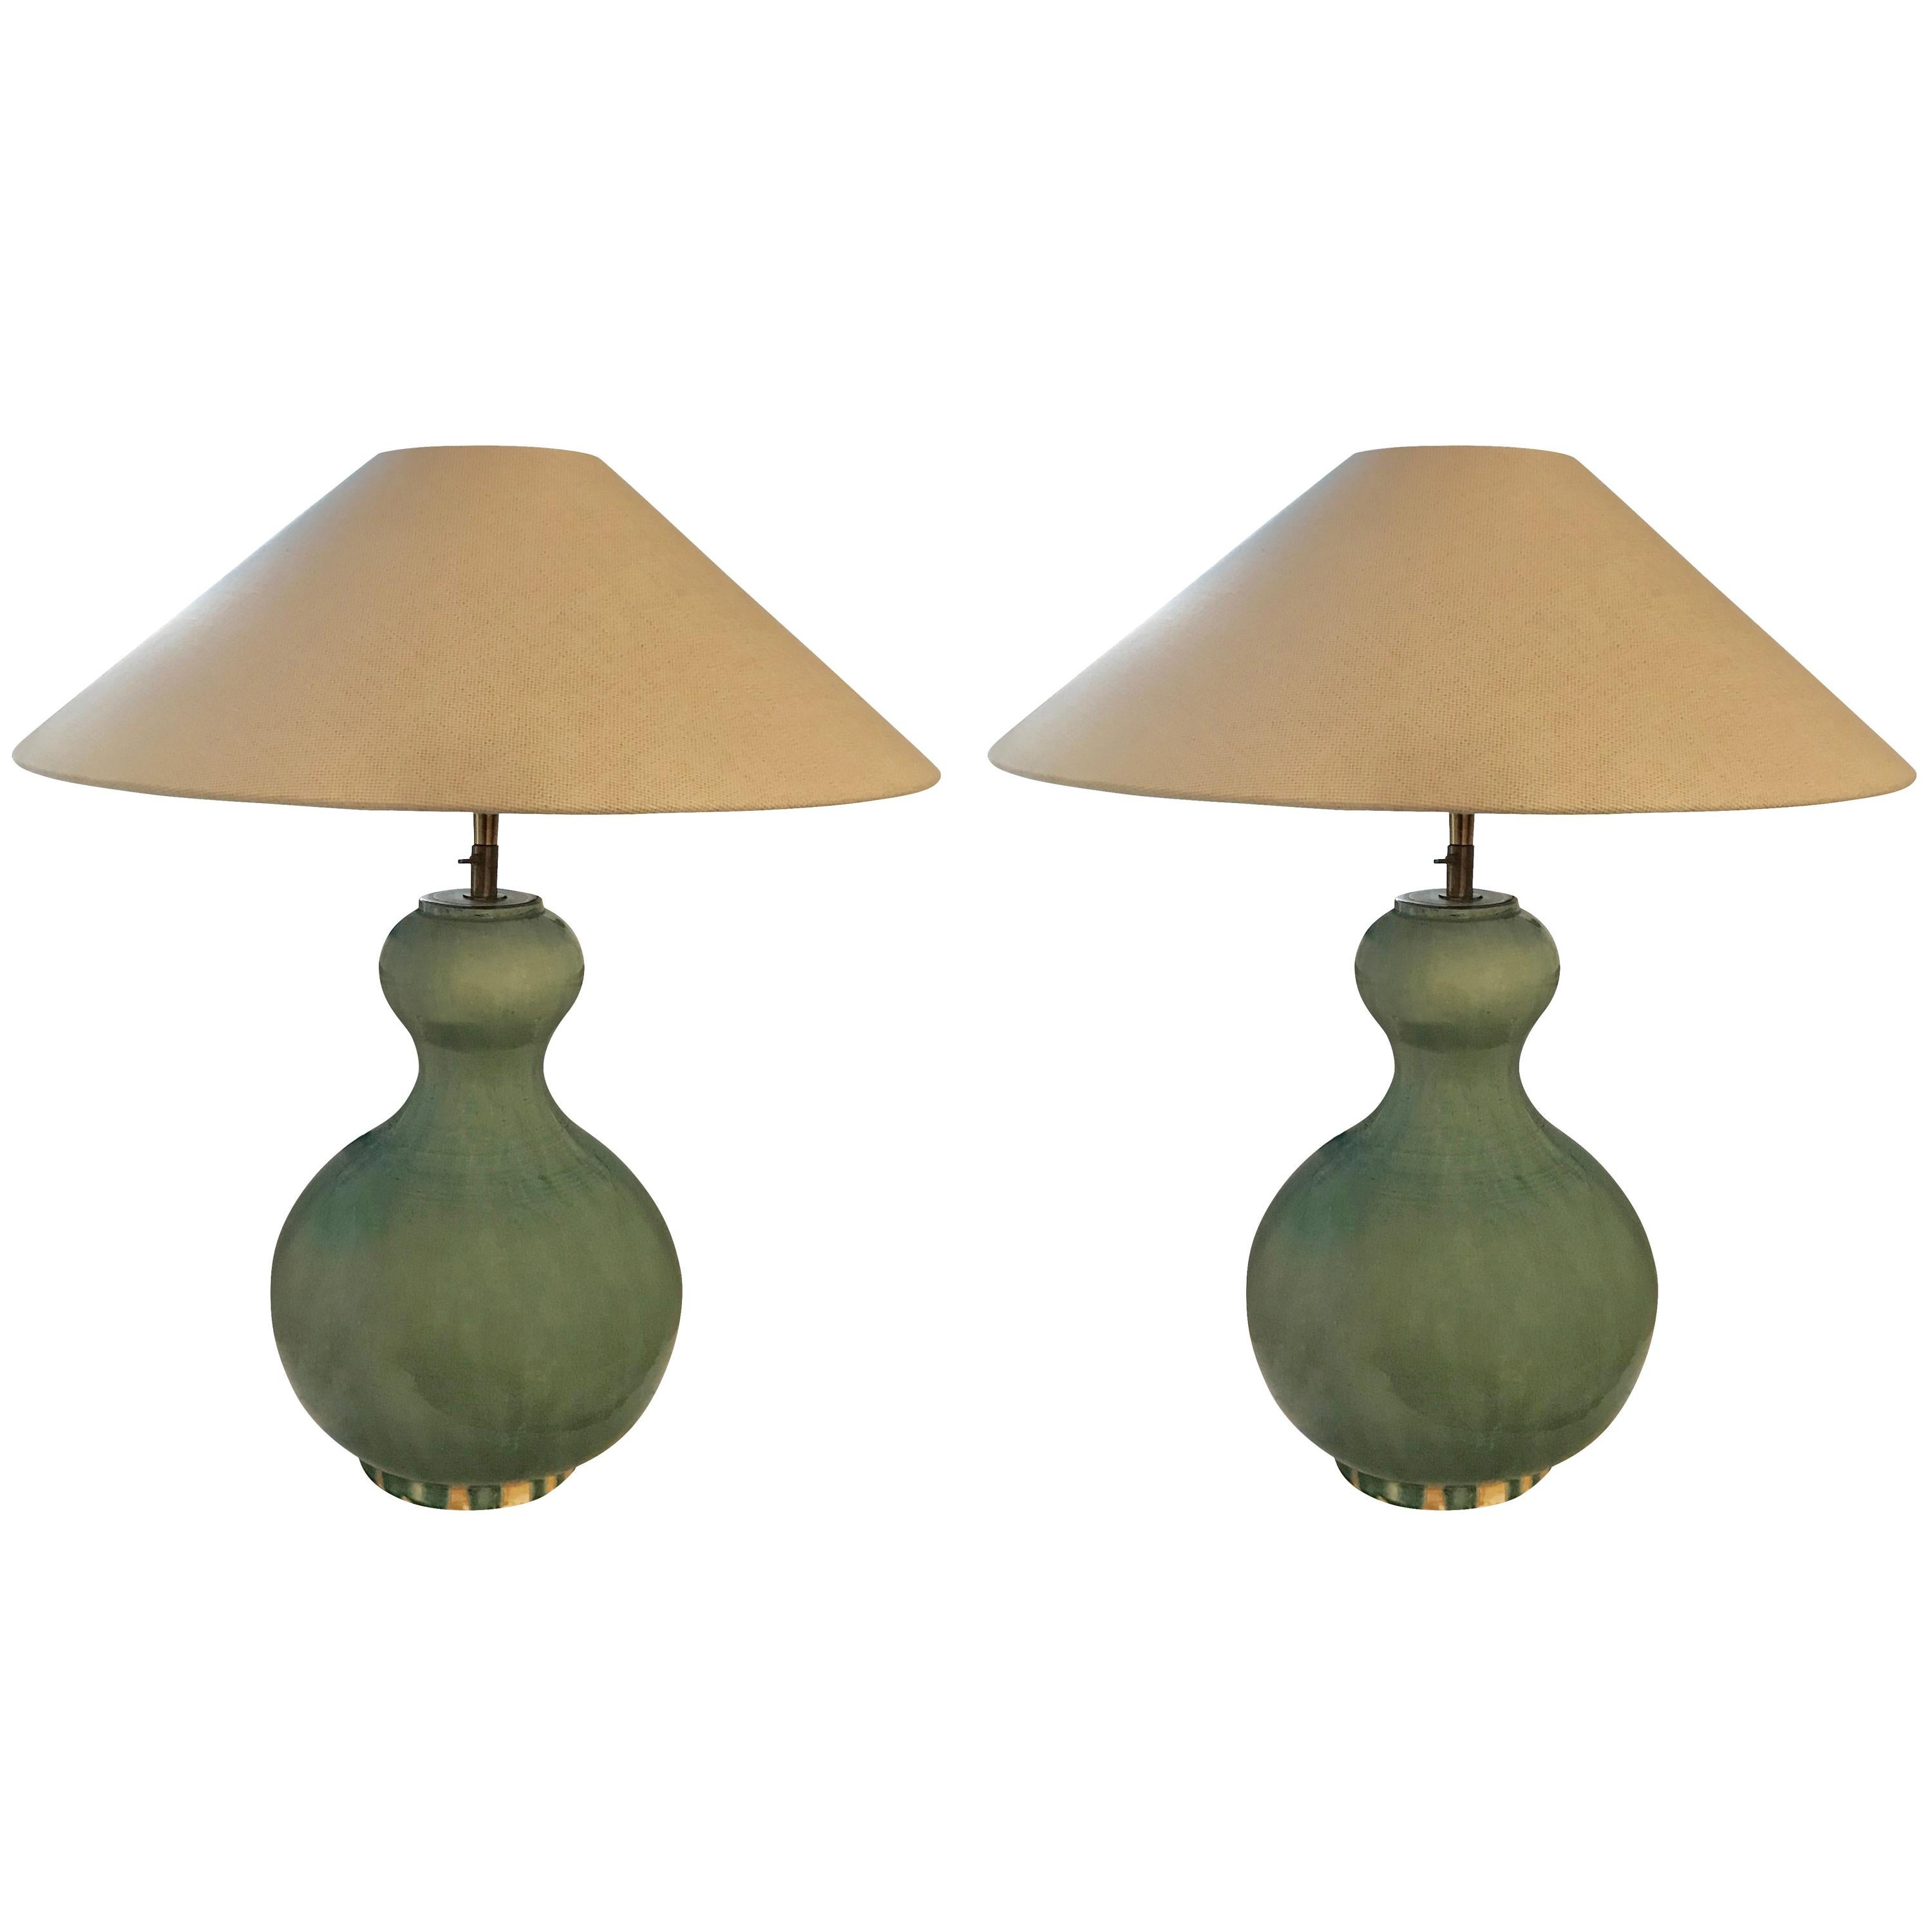 Pair of Gourd Shape Washed Turquoise Lamps, China, Contemporary